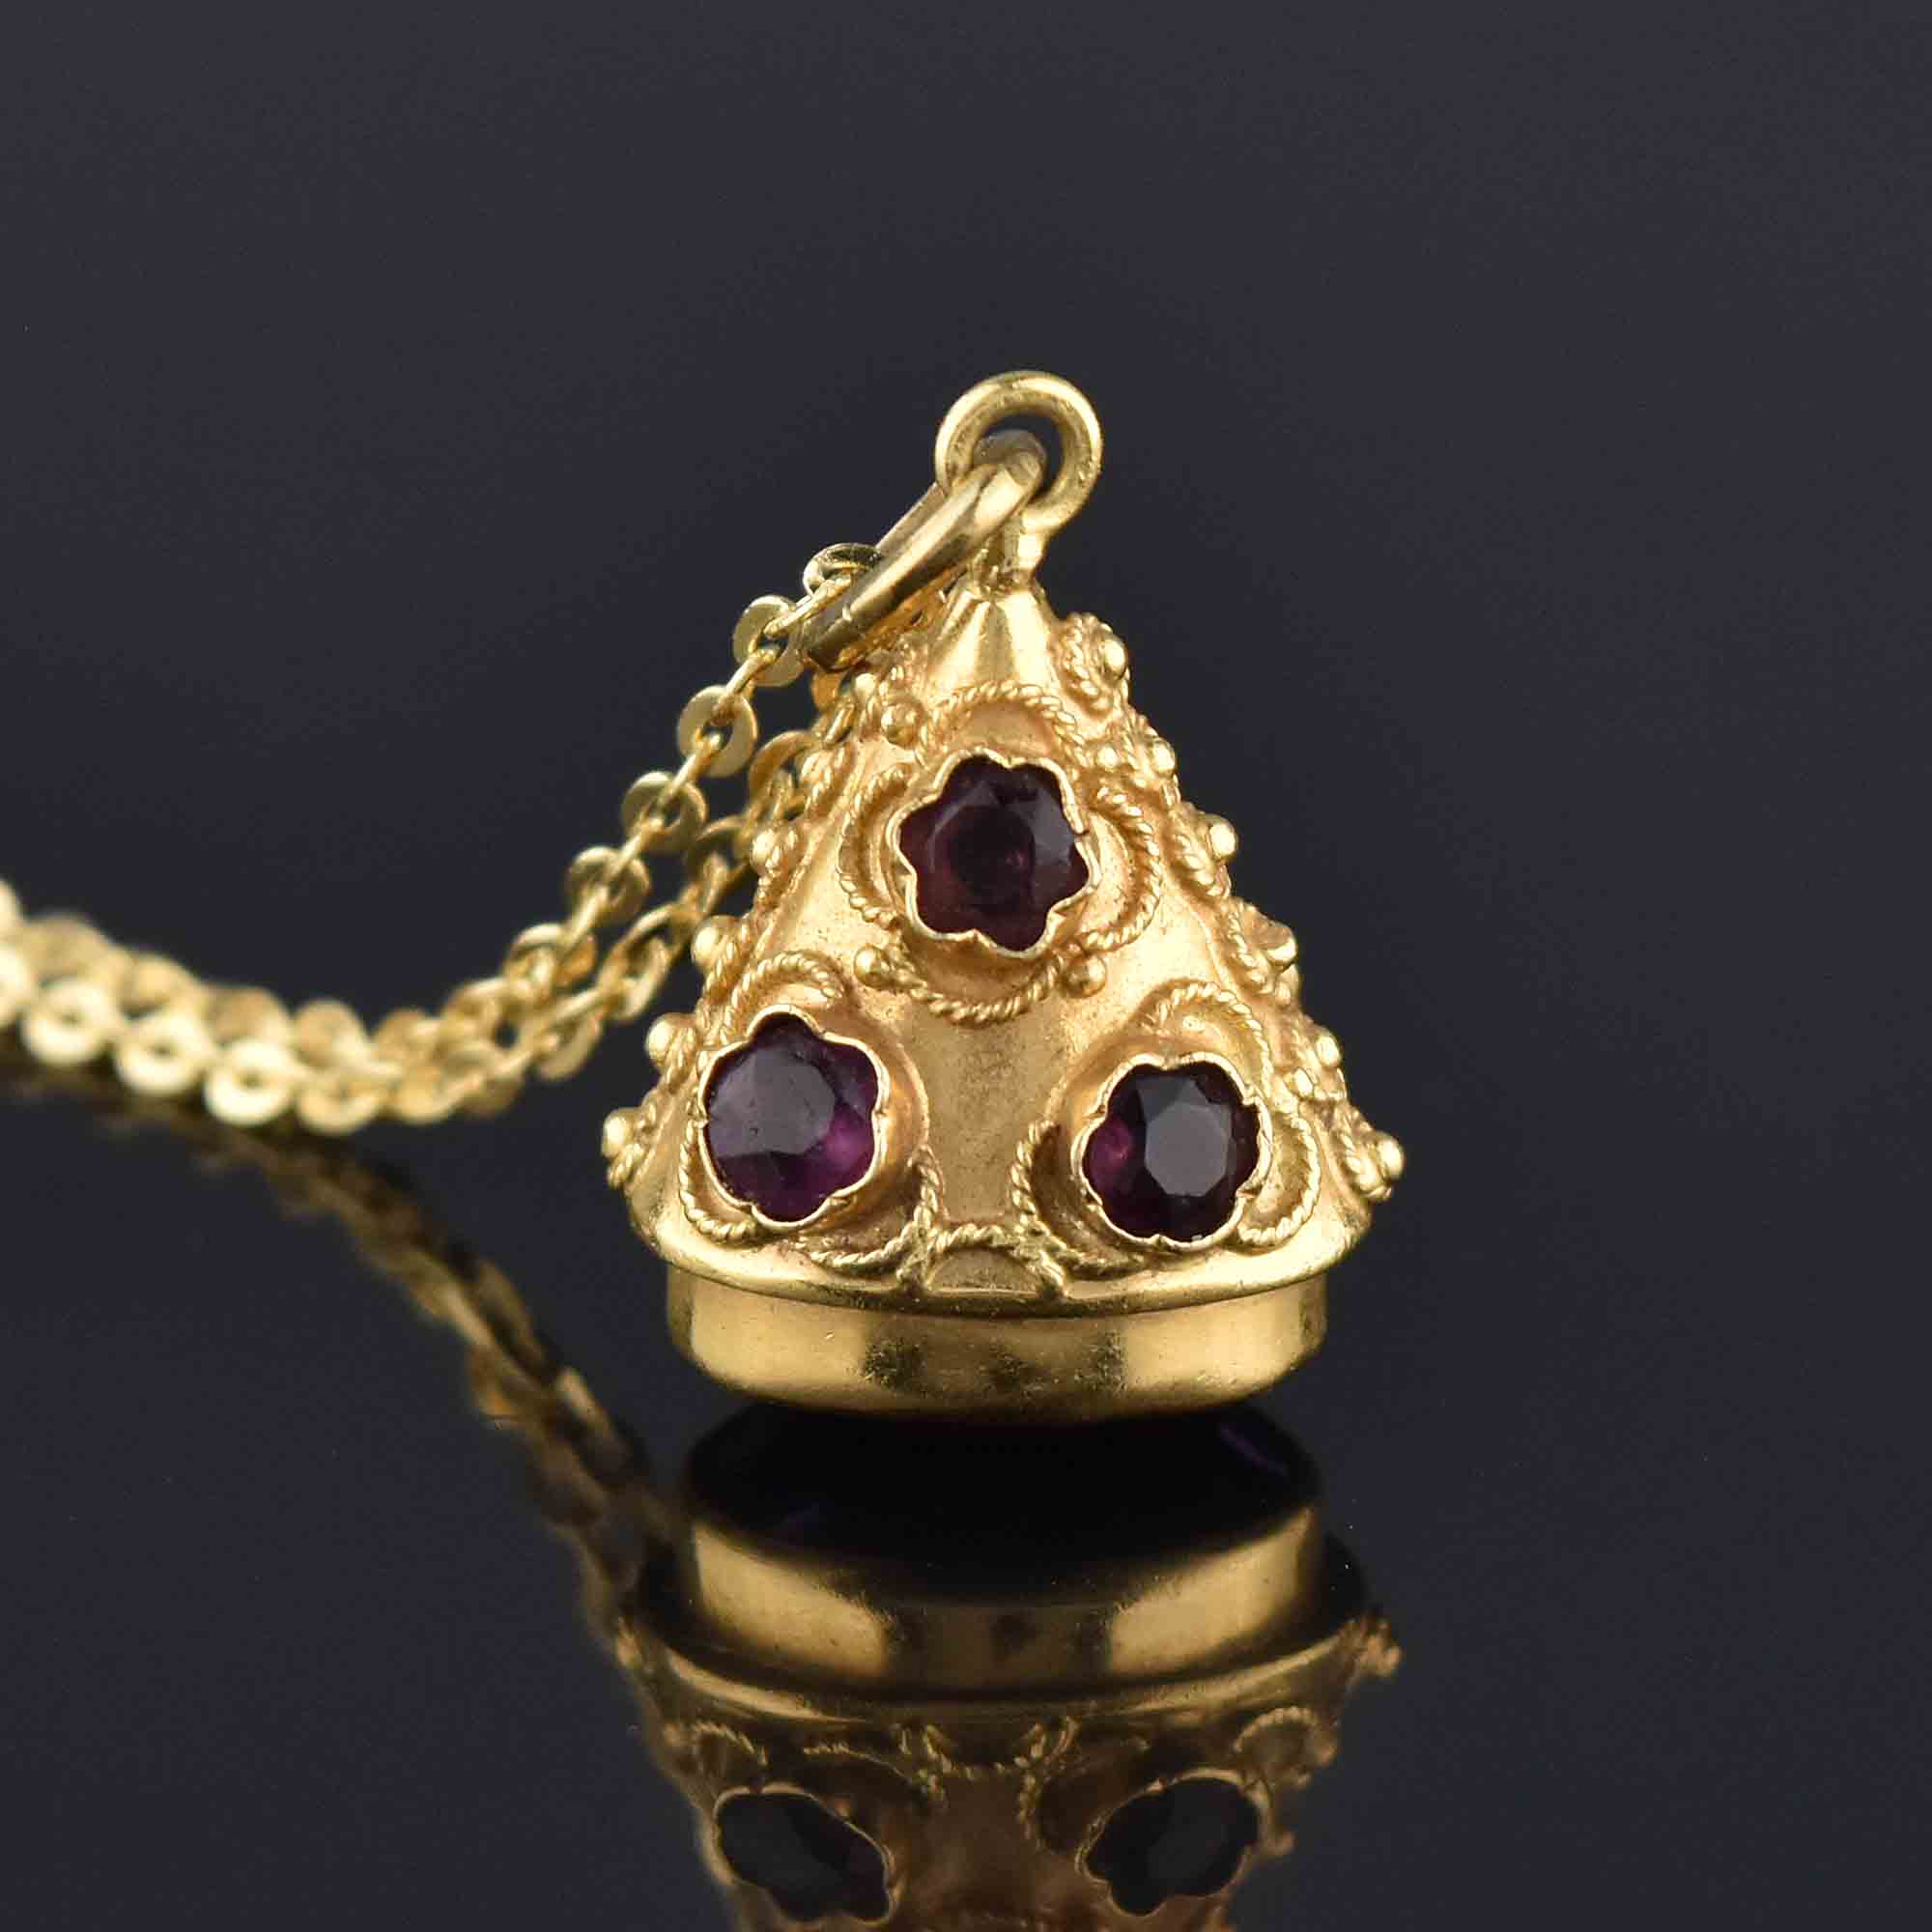 Small Gold Pendant TierraCast Eye of Providence Charm - Antique Gold Charms for Jewelry Making Metaphysical Yoga Charms (P1473)